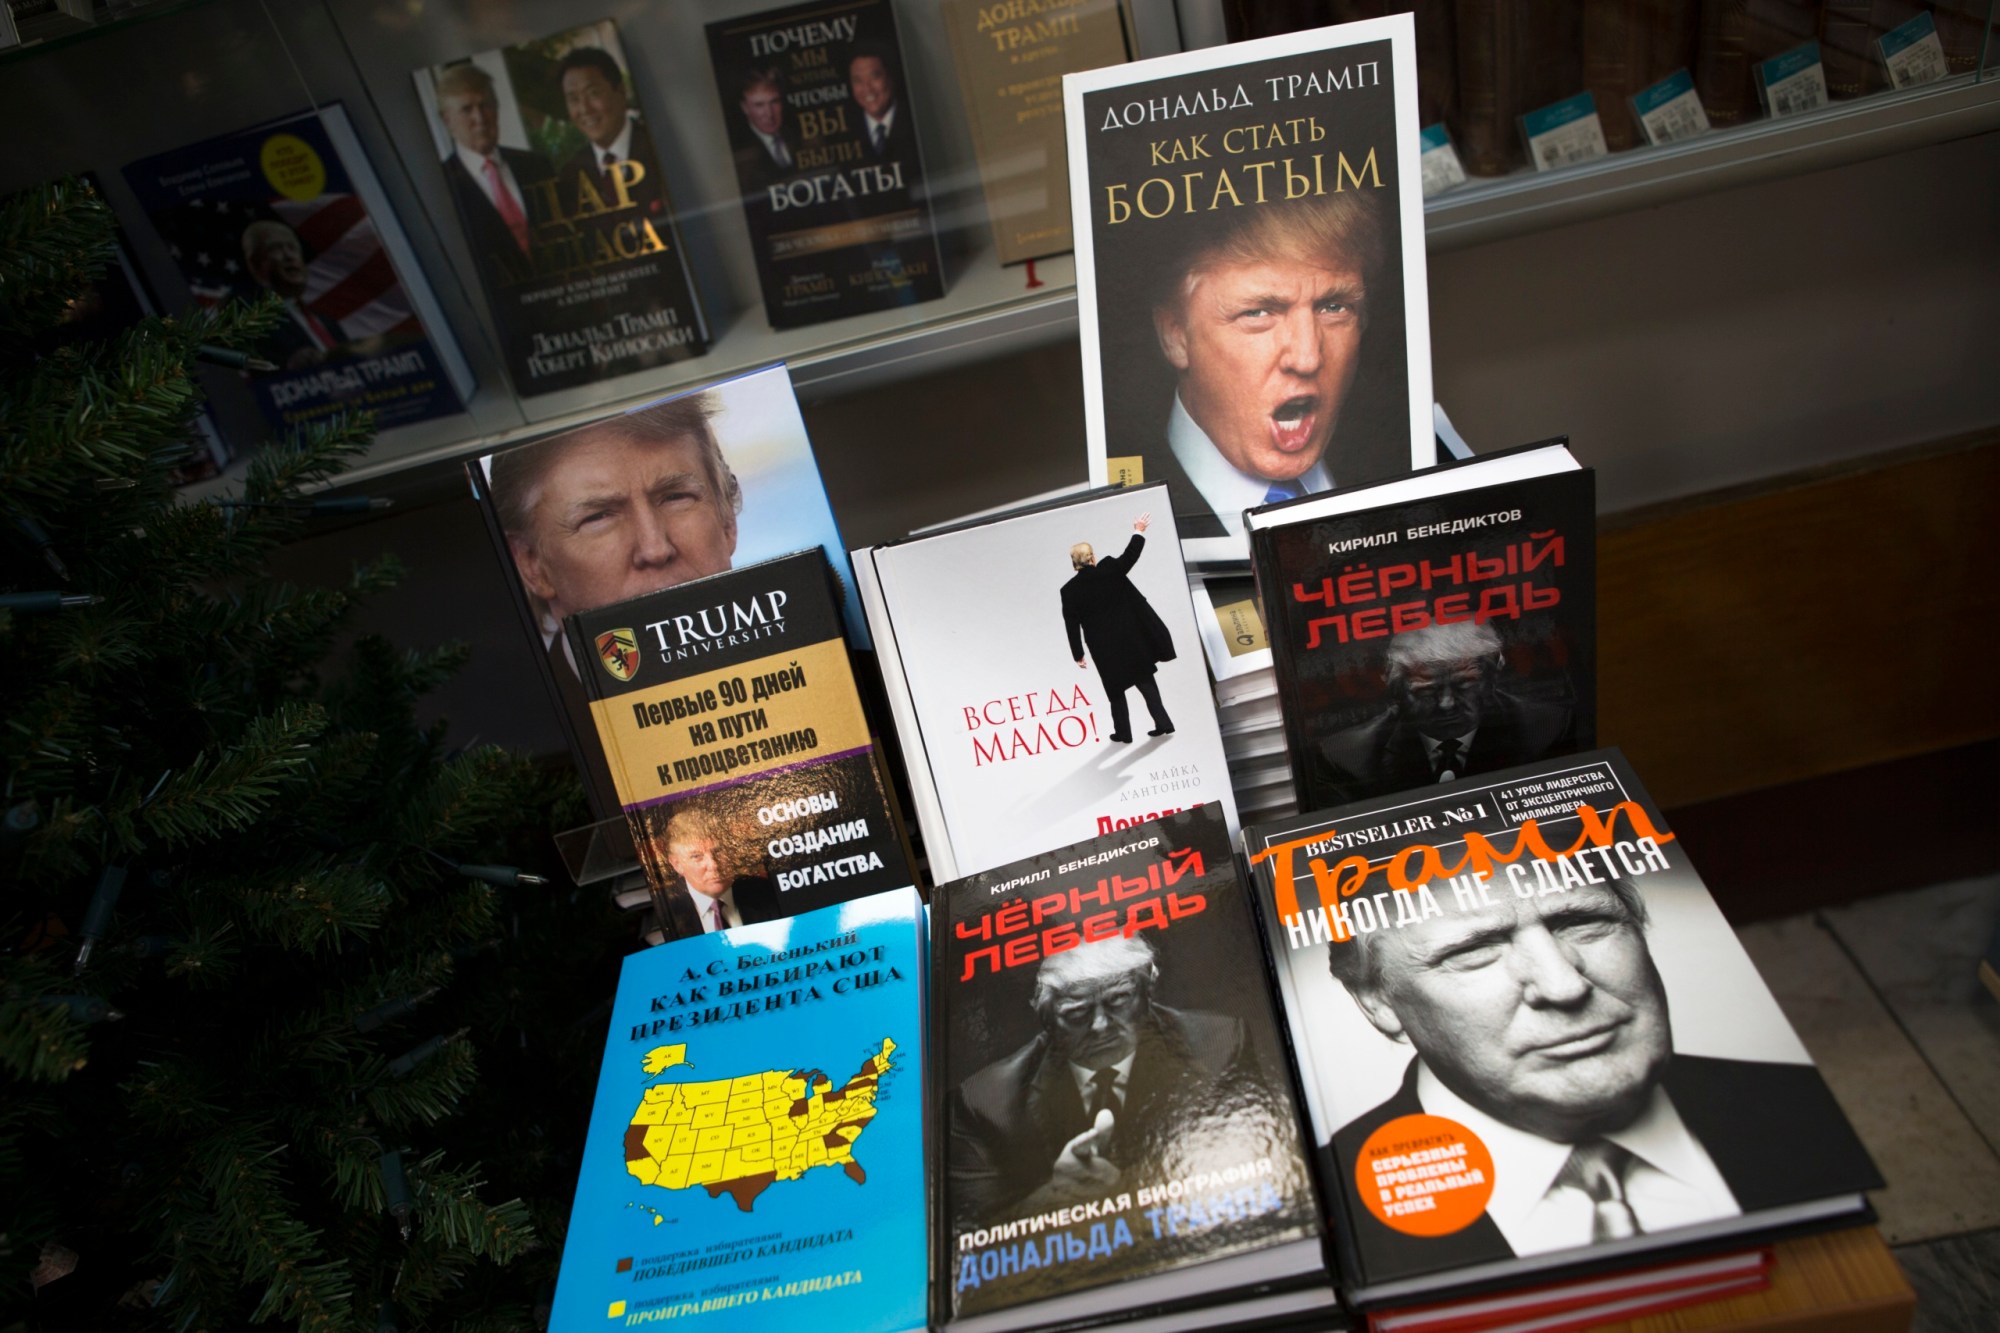 Books by President-elect Donald Trump and about him sit on a display in the Moscow House of Books in Moscow, November 14, 2016. (AP/Alexander Zemlianichenko)